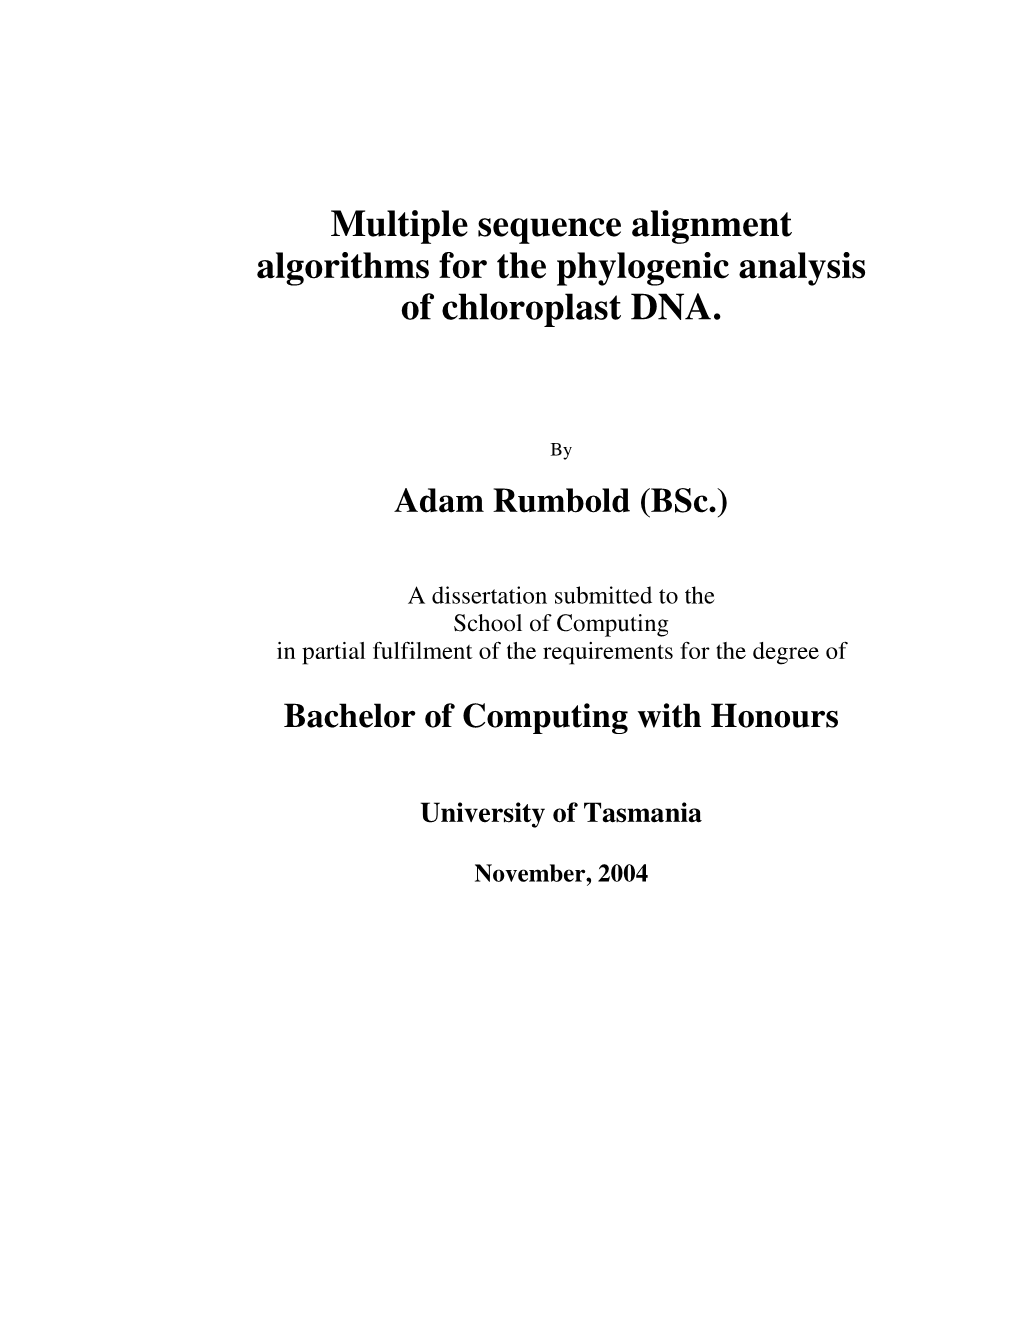 Multiple Sequence Alignment Algorithms for the Phylogenic Analysis of Chloroplast DNA